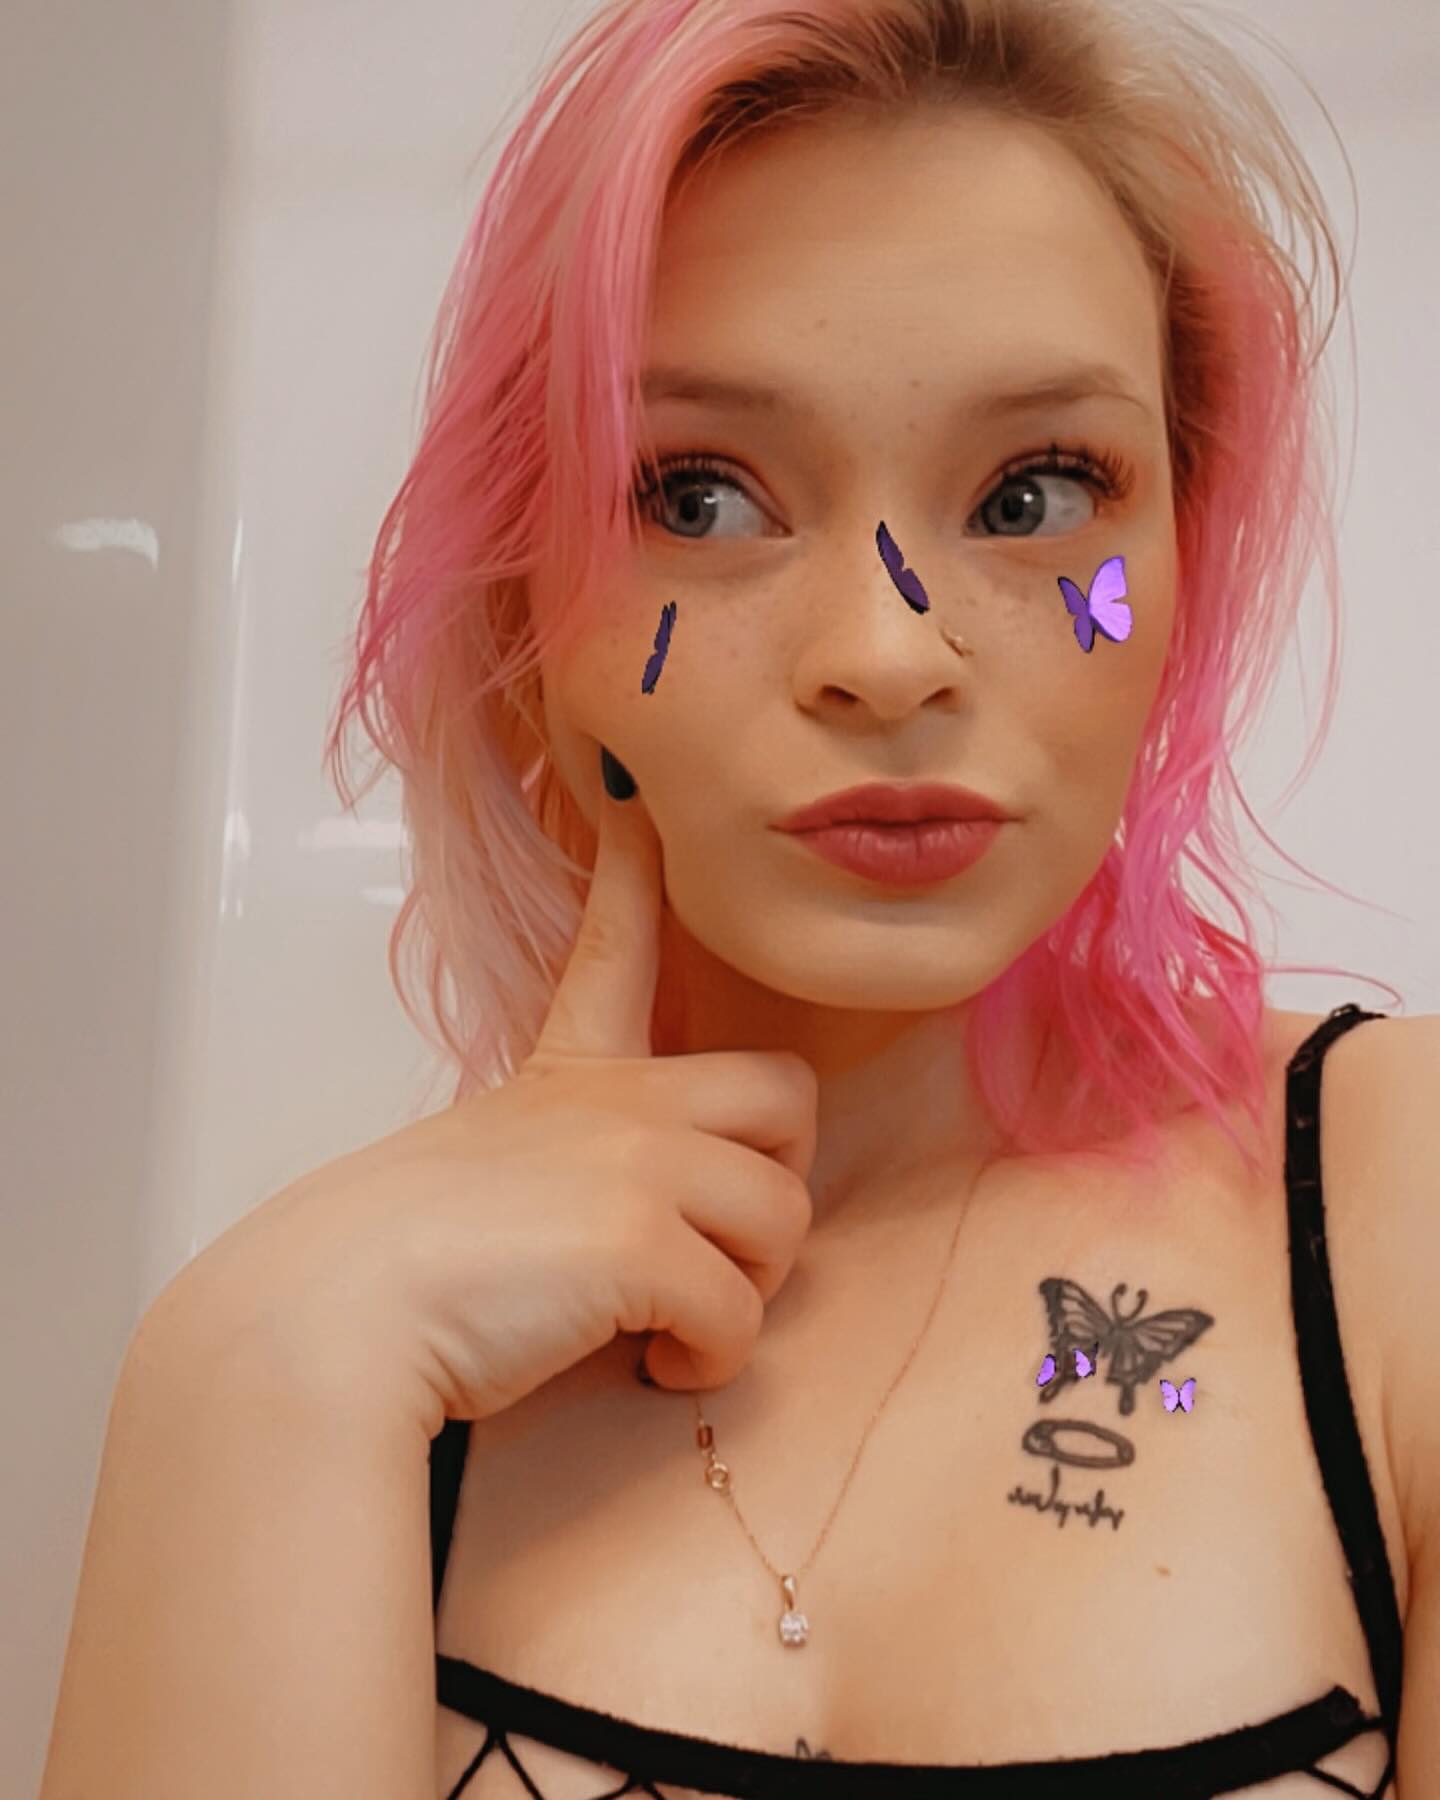 New tattoos currently healing, can’t wait to show you 😊 #tatted #pinkhair #linkinbio #petite